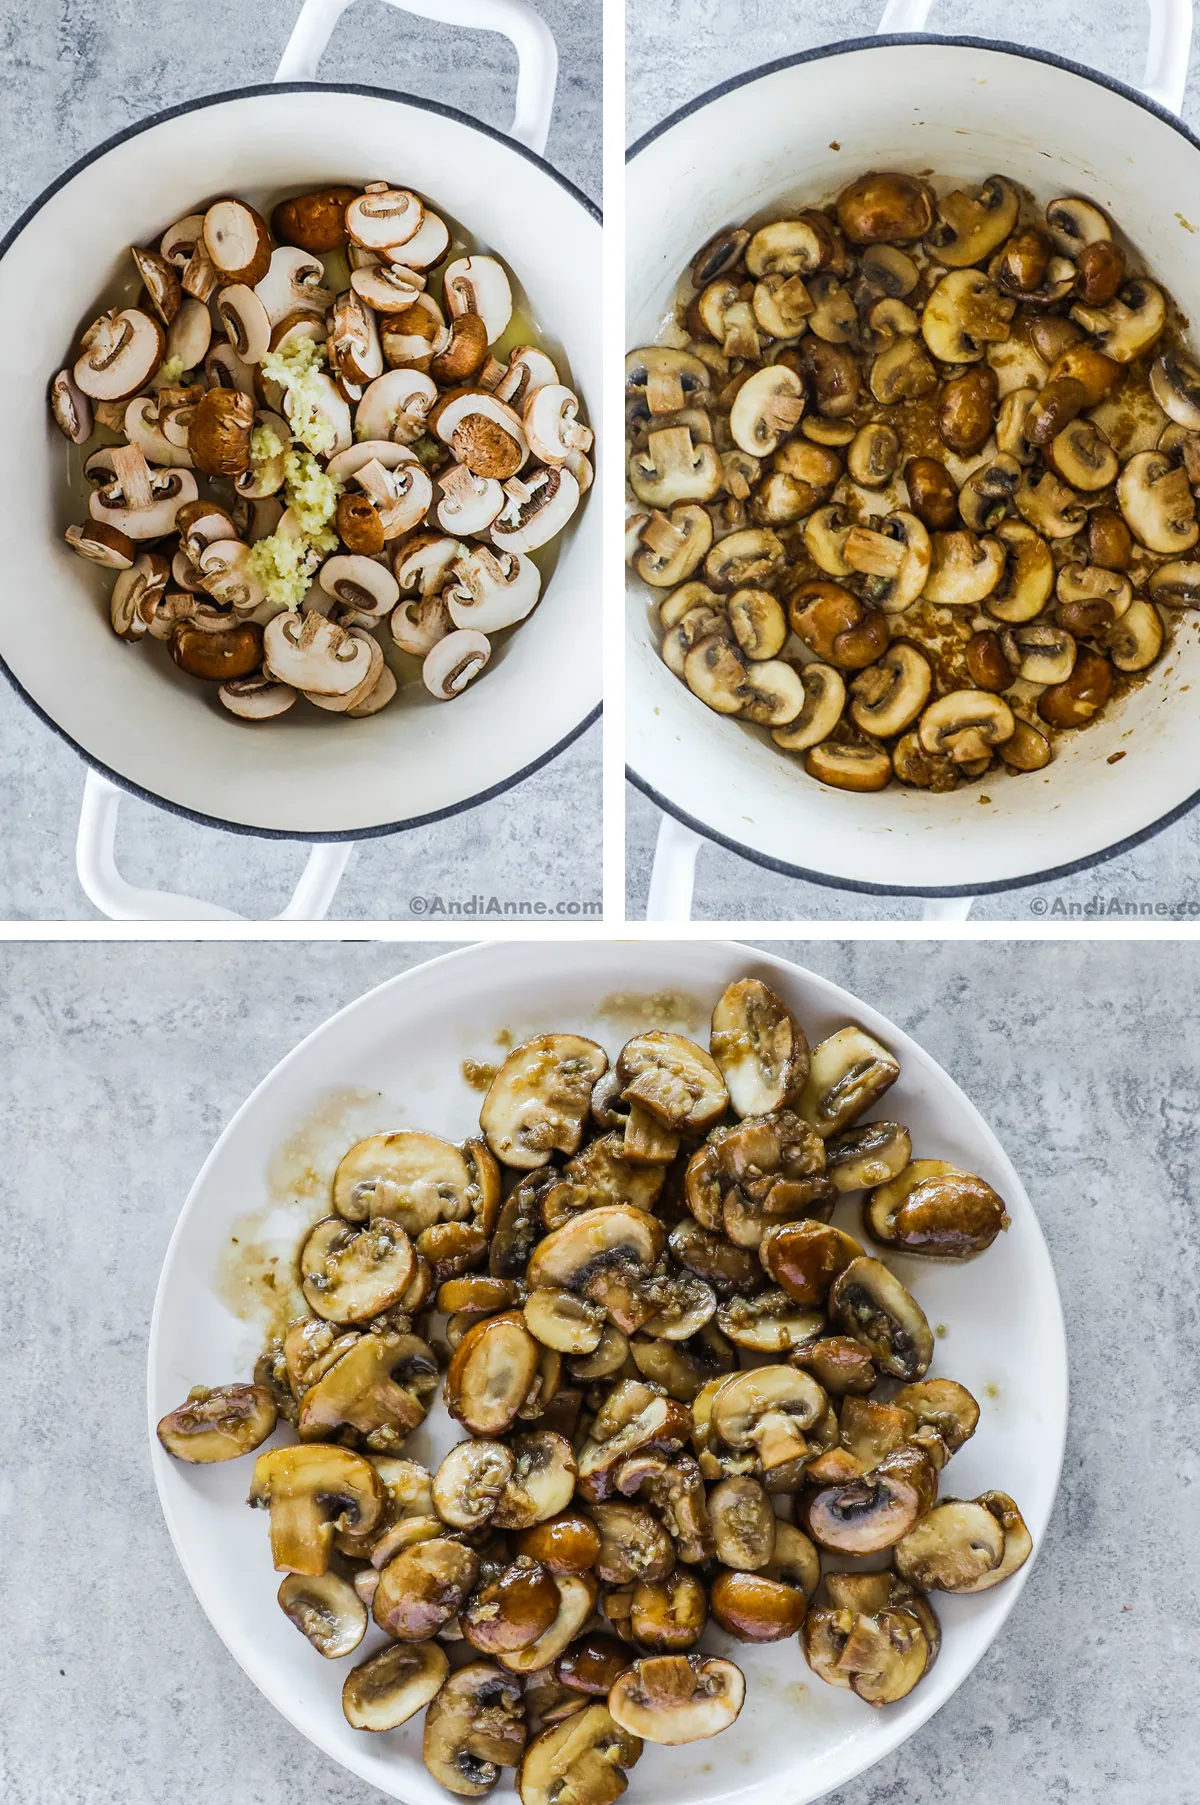 A pot of mushrooms and garlic uncooked, then sauteed. And a plate of cooked mushrooms.